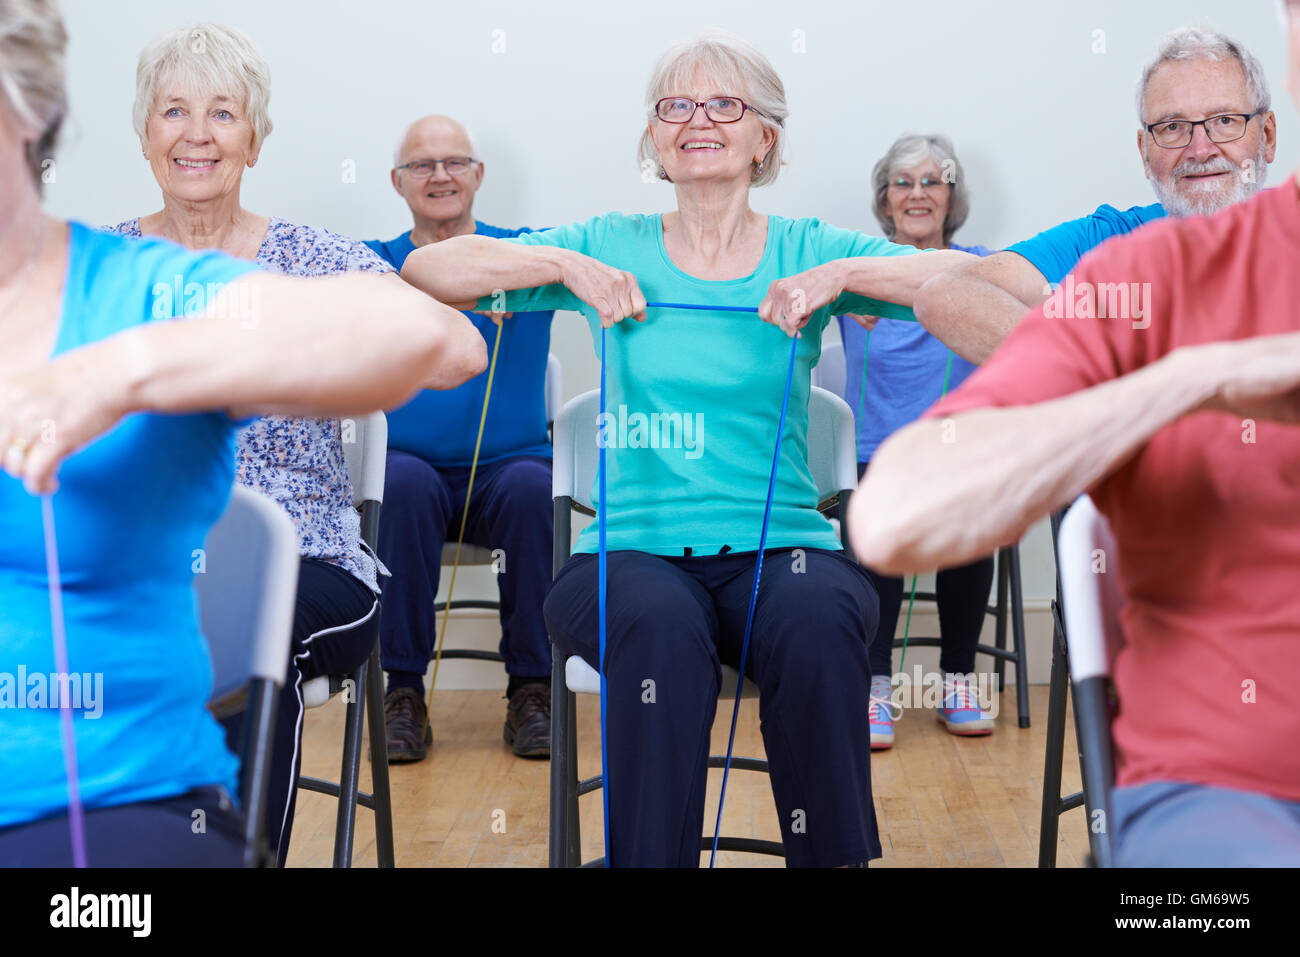 Group Of Seniors Using Resistance Bands In Fitness Class Stock Photo